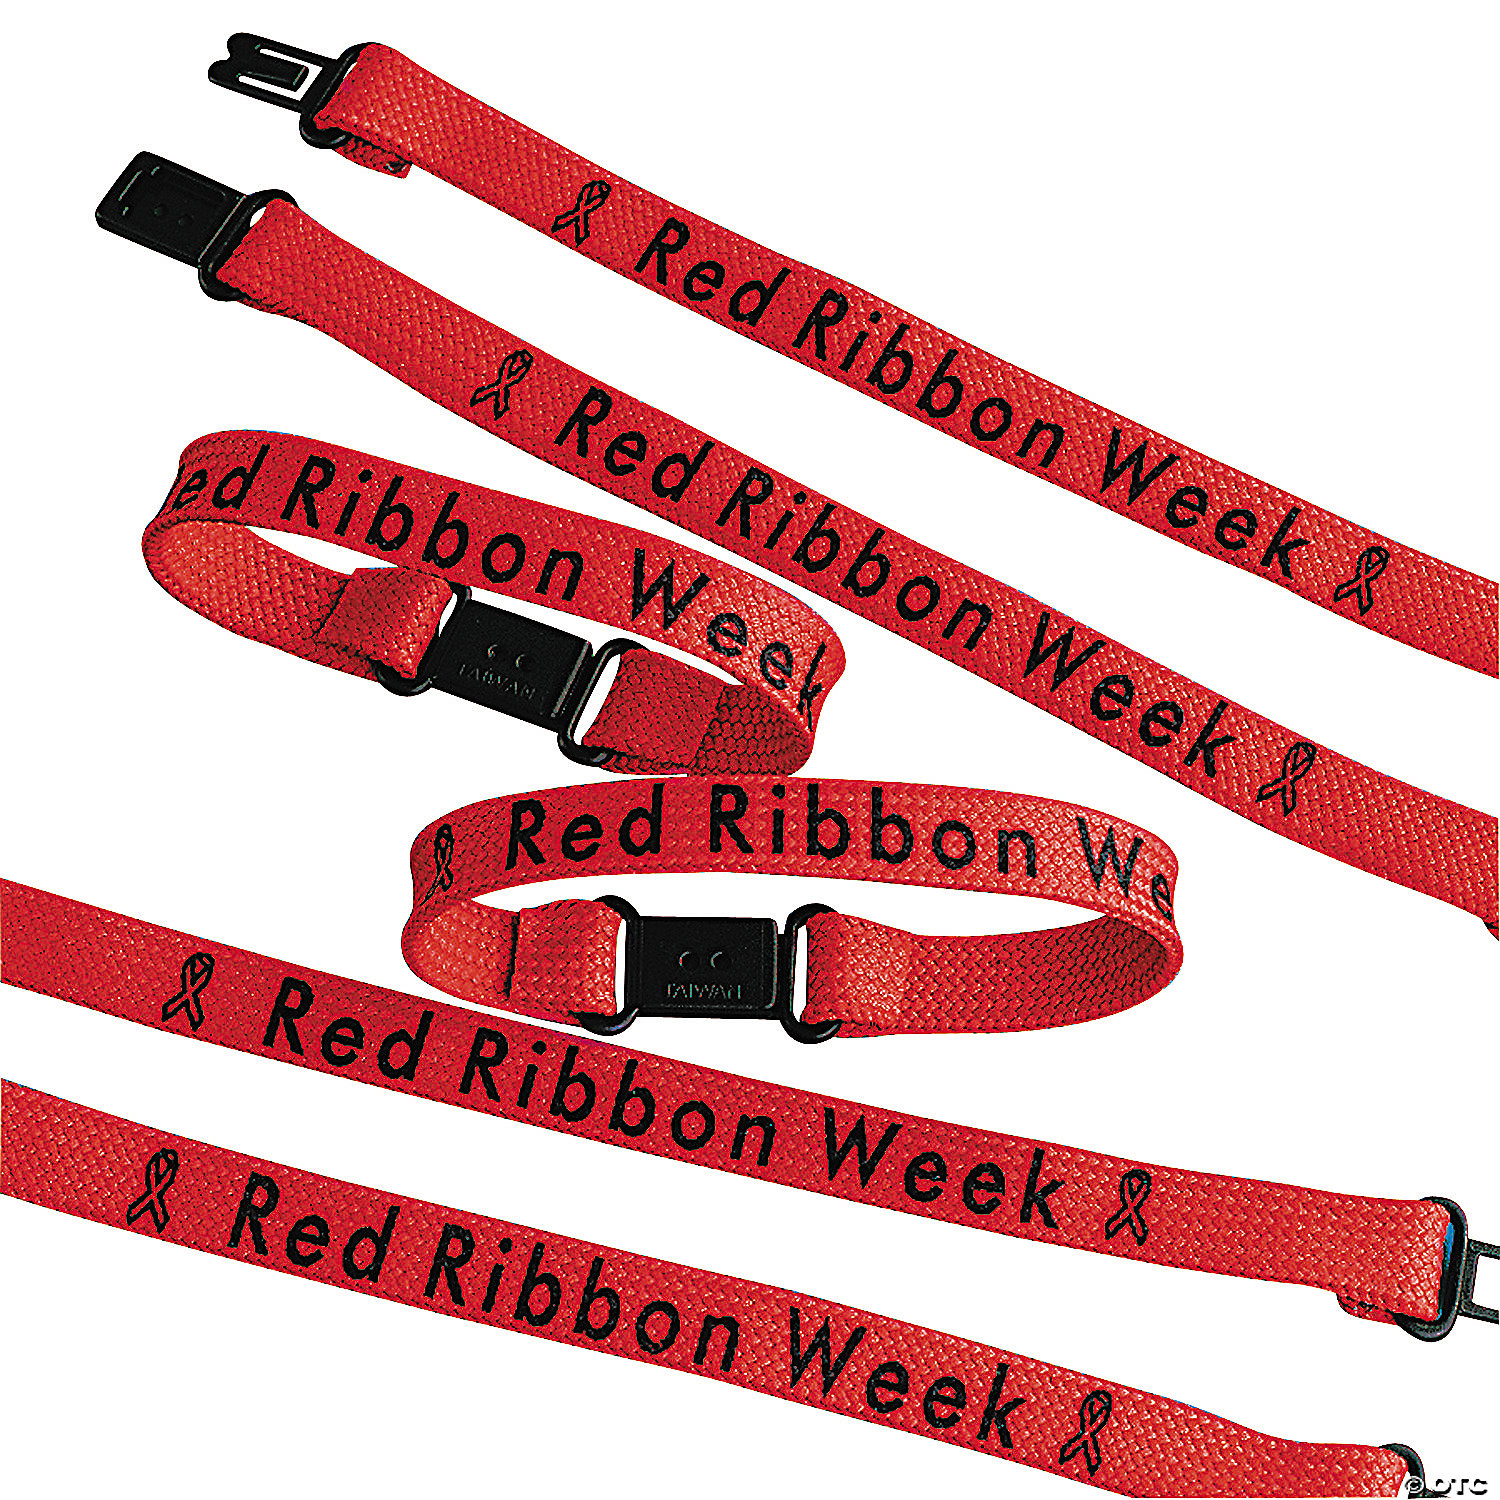 30 Live Drug Free Wristbands Drugs are Not for Me Bracelets Red Ribbon Week Bands 